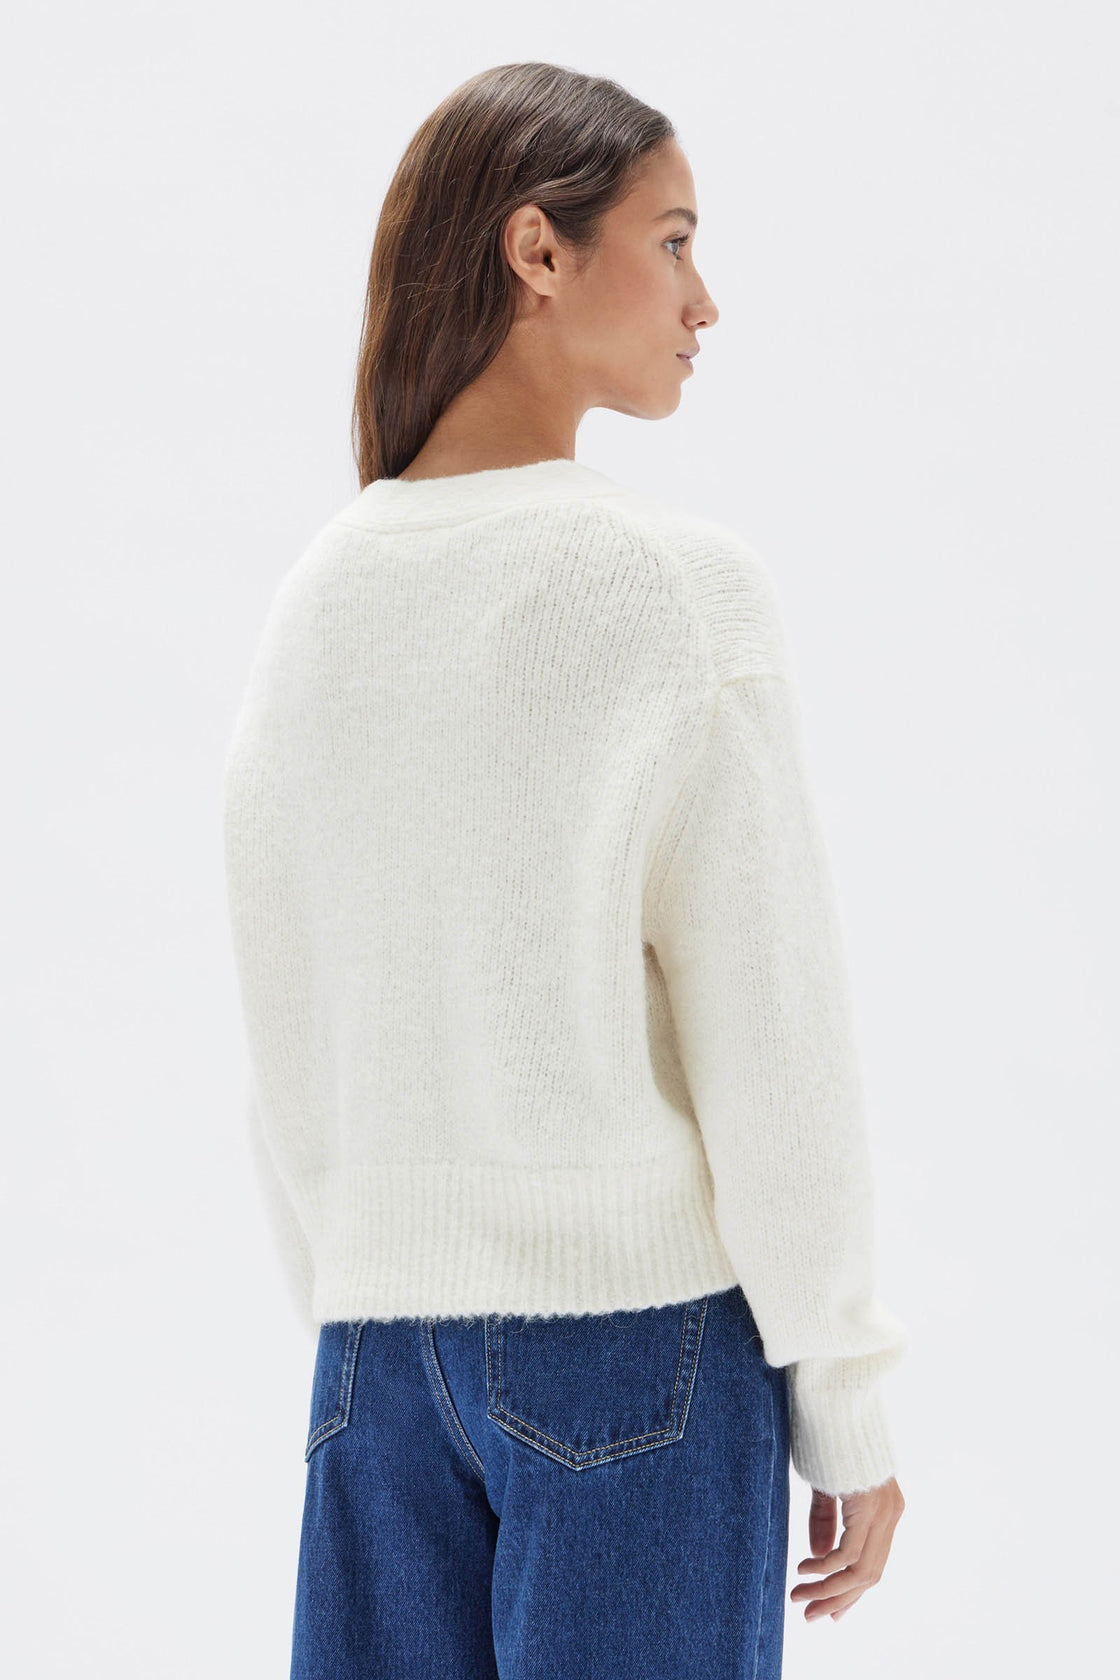 Assembly Label Evi Wool Knit Cardigan